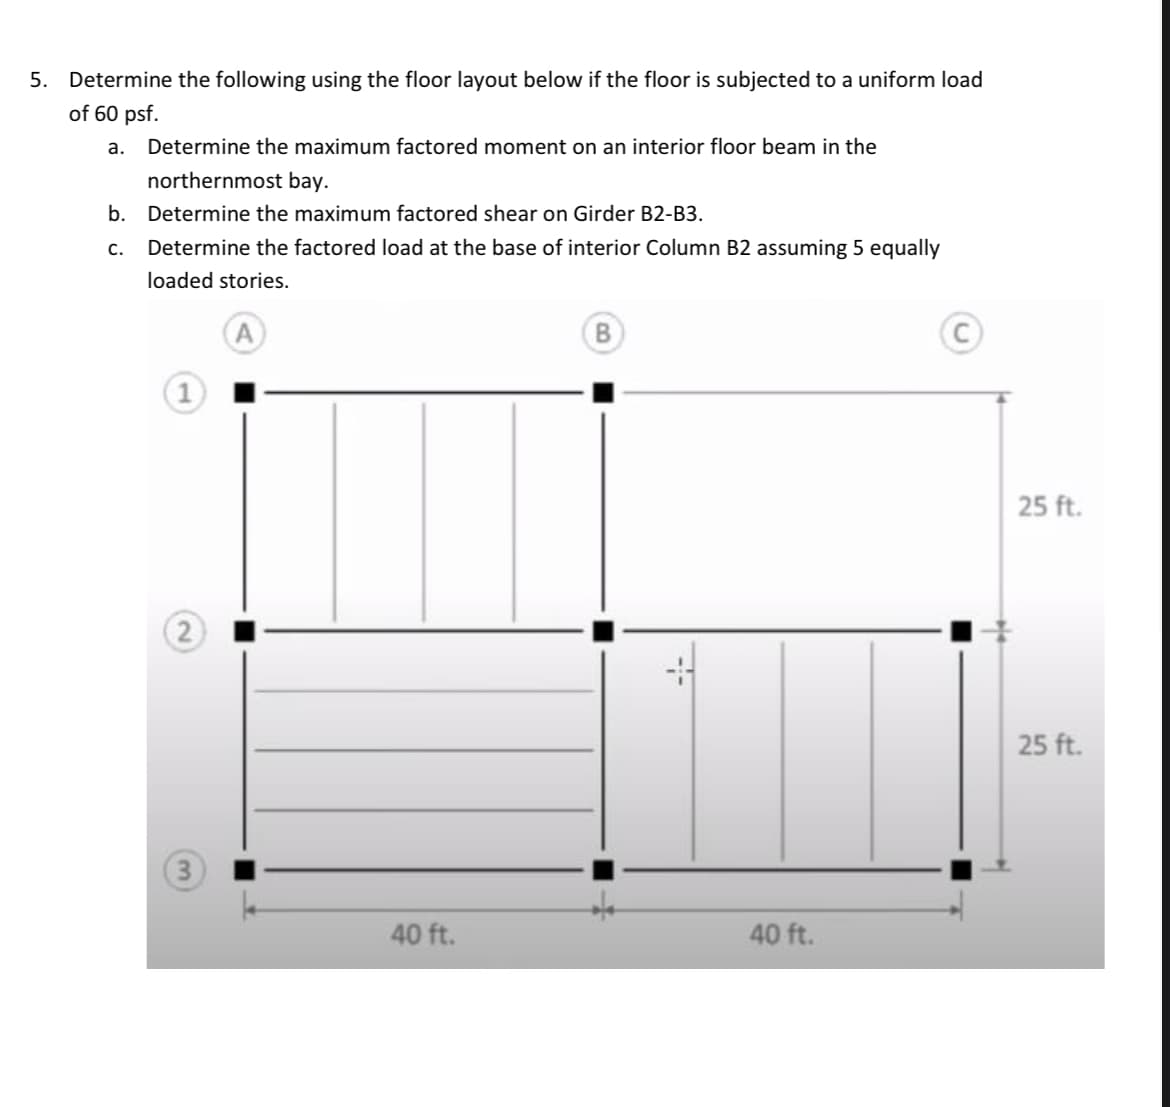 5. Determine the following using the floor layout below if the floor is subjected to a uniform load
of 60 psf.
Determine the maximum factored moment on an interior floor beam in the
northernmost bay.
b.
Determine the maximum factored shear on Girder B2-B3.
C. Determine the factored load at the base of interior Column B2 assuming 5 equally
loaded stories.
A
a.
2
3
40 ft.
B
40 ft.
25 ft.
25 ft.